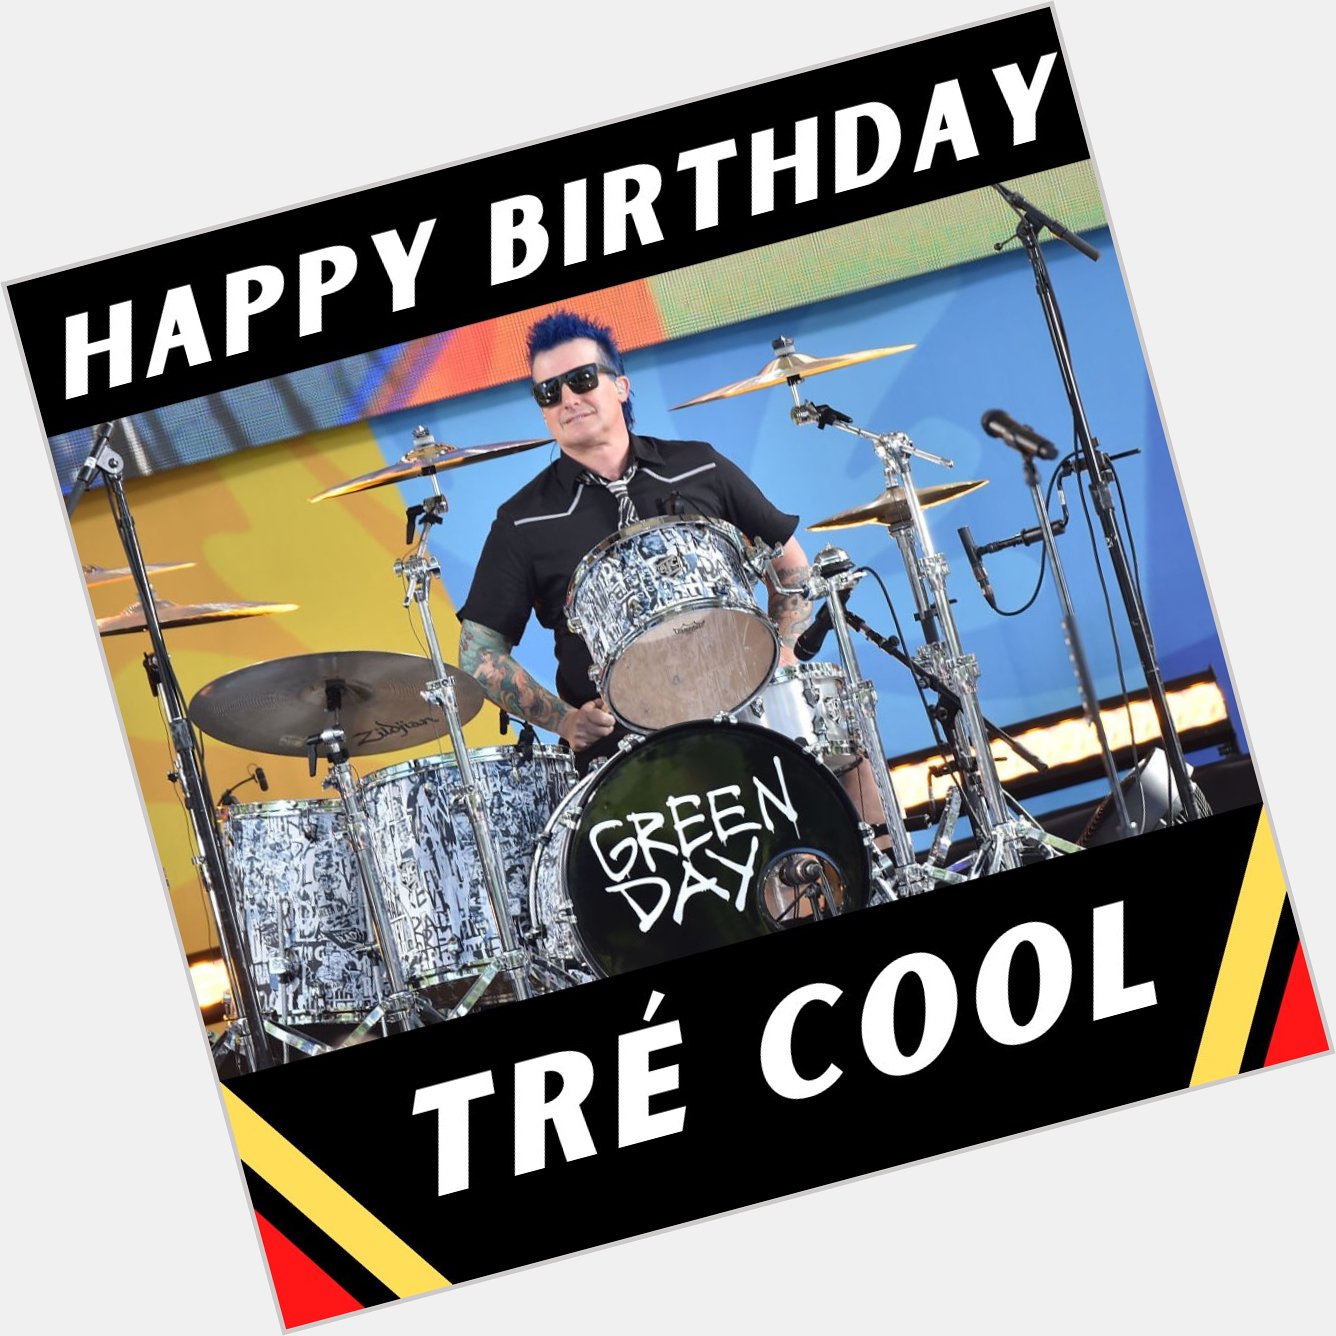 Wishing a happy birthday to Green Day drummer Tré Cool

Photo by Theo Wargo/Getty Images 